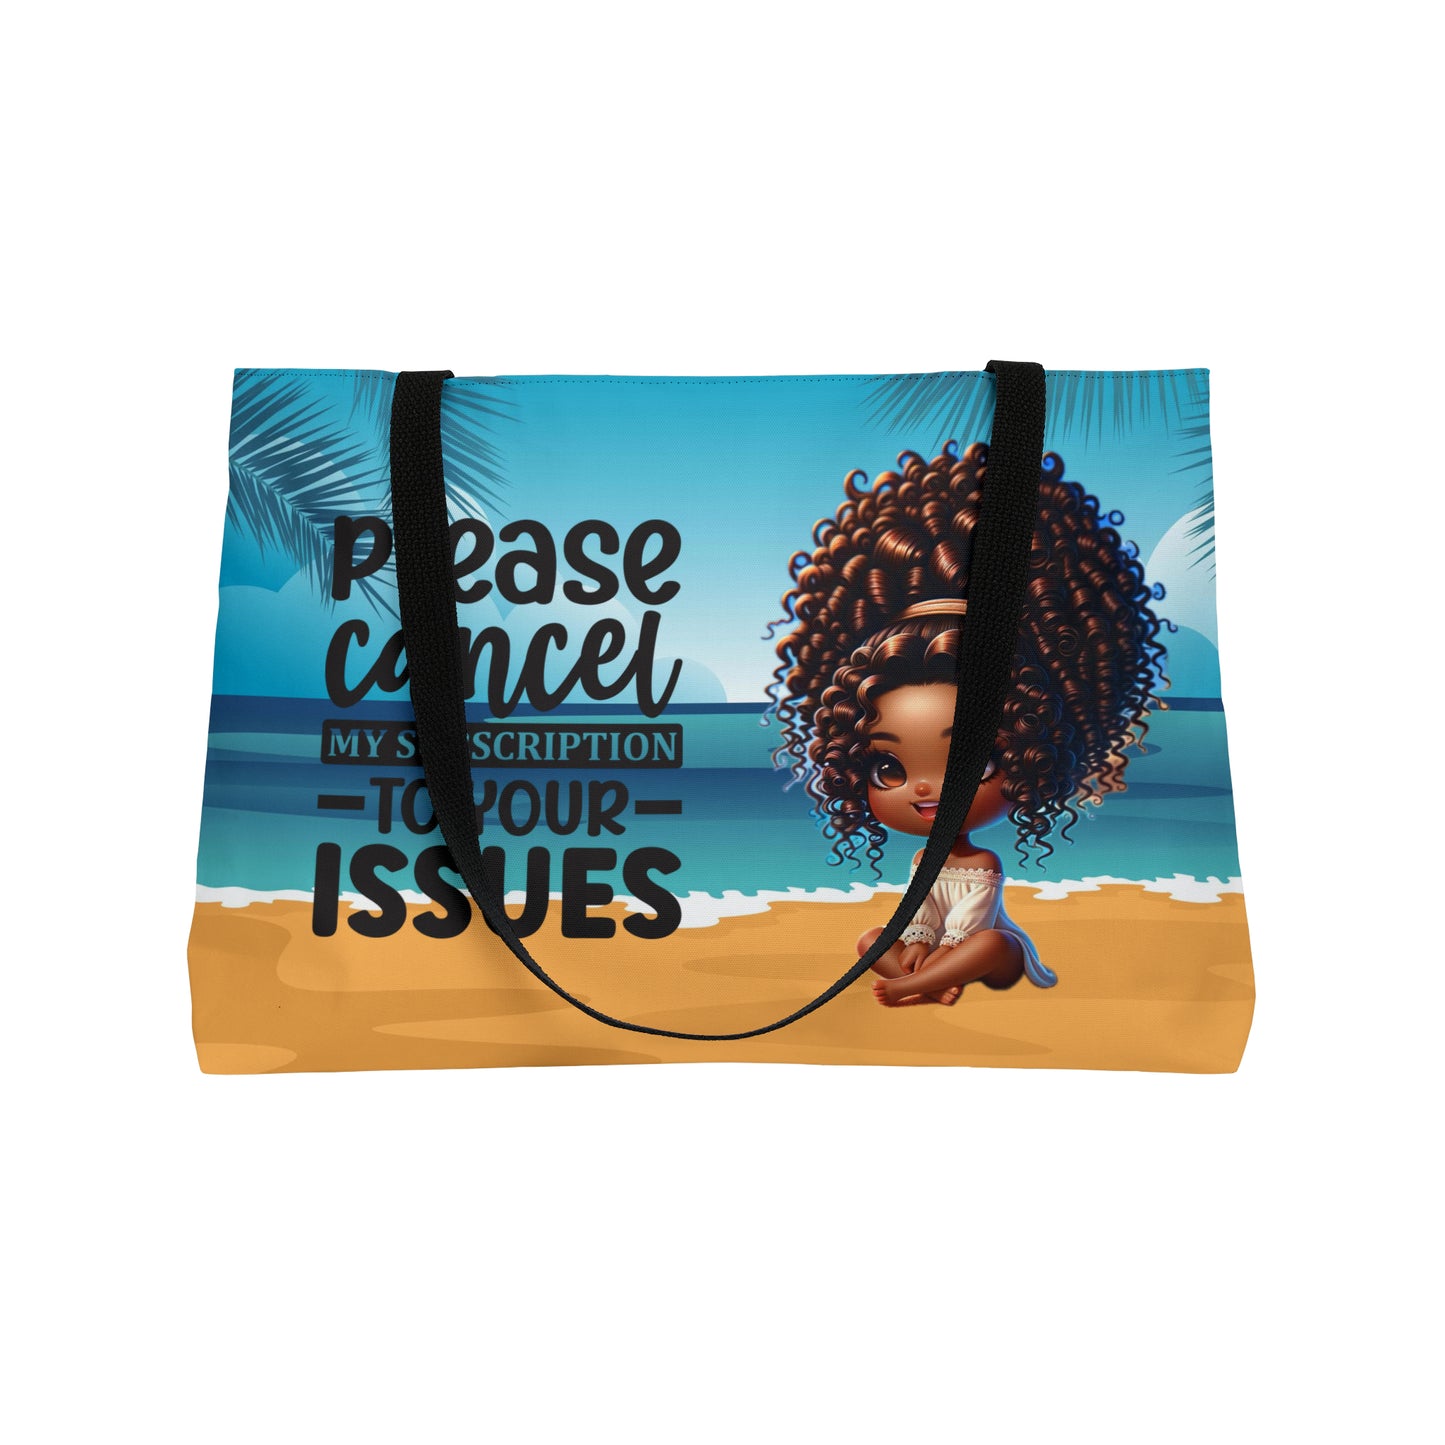 Weekender Tote Bag - Please cancel my subscription to your issues